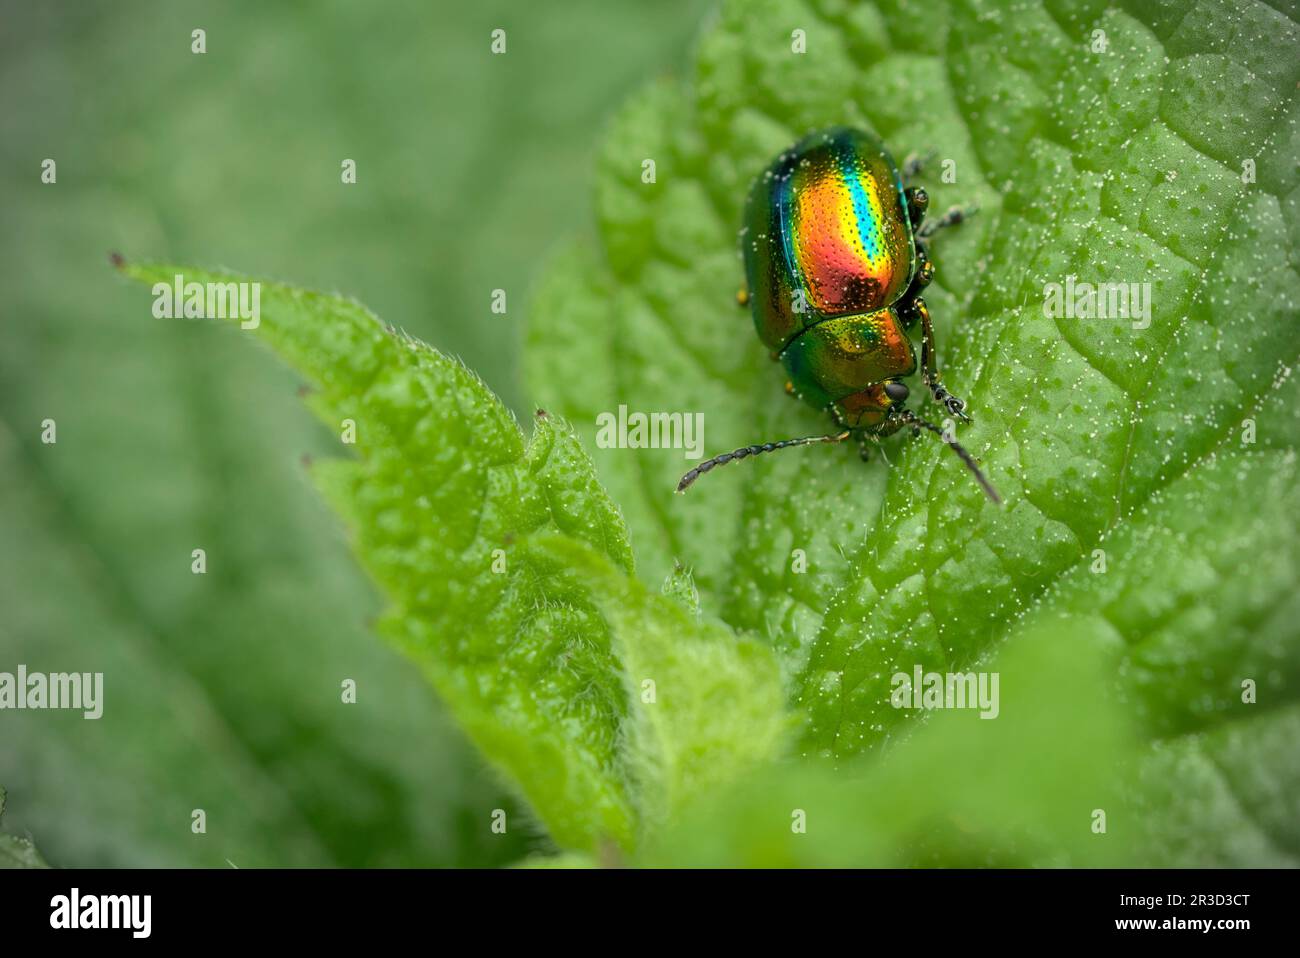 Single leaf beetle (Chrysolina cf. fastuosa) on a leaf of a nettle (Utrica sp.) Macro photography, insects, beetles, closeup, biodiversity Stock Photo